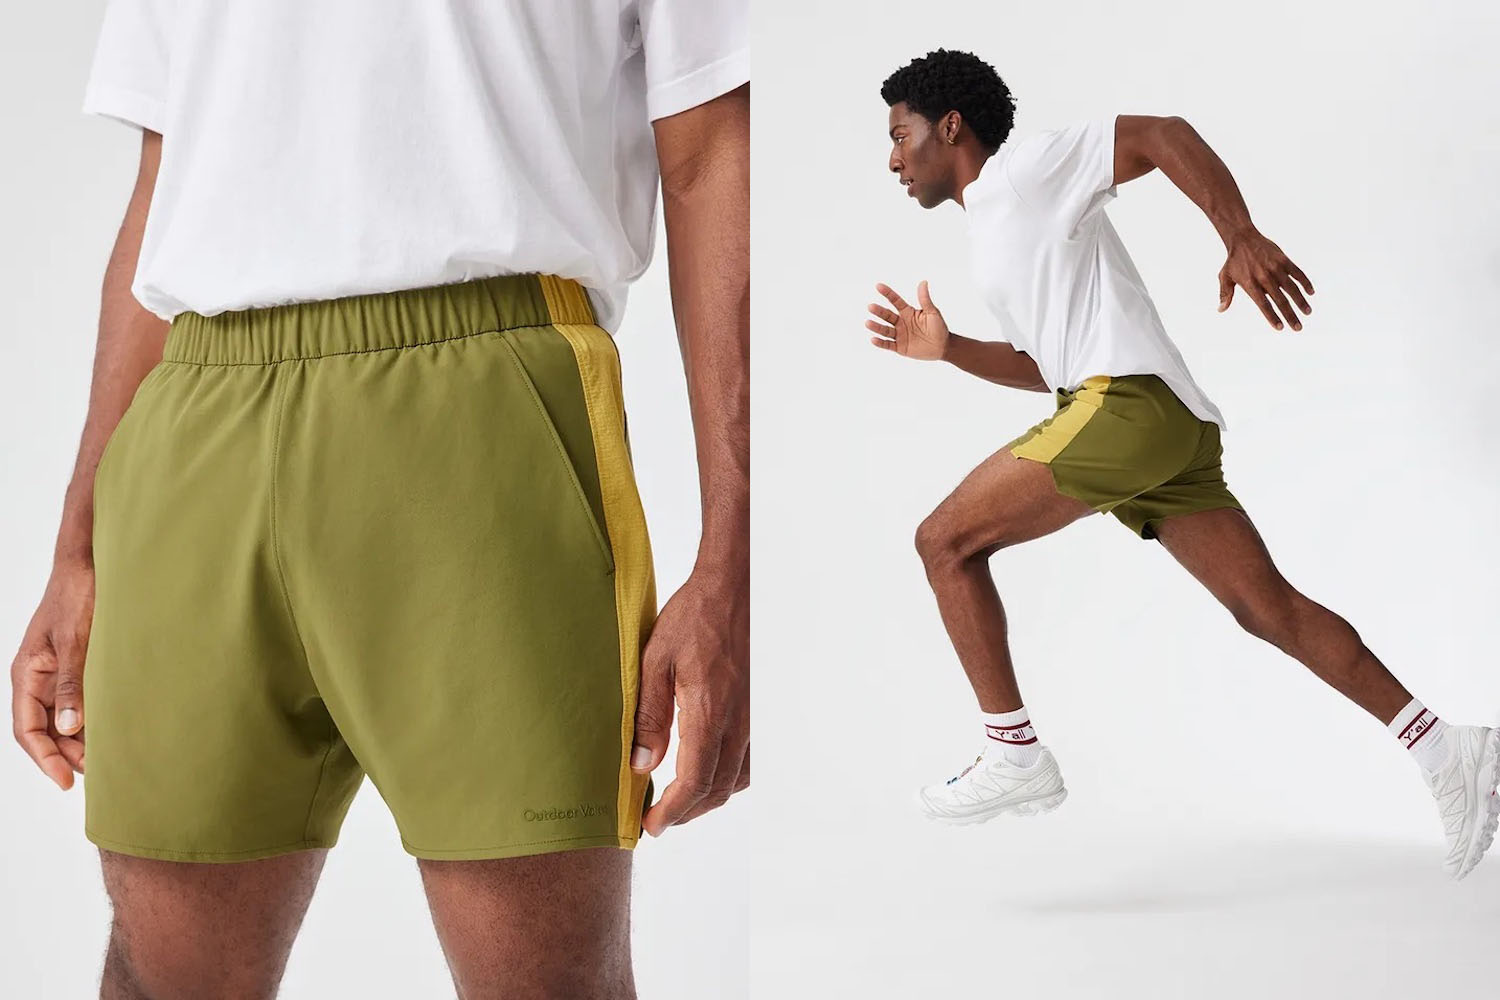 two model shots of the Outdoor Voices High Tide Shorts on a light background